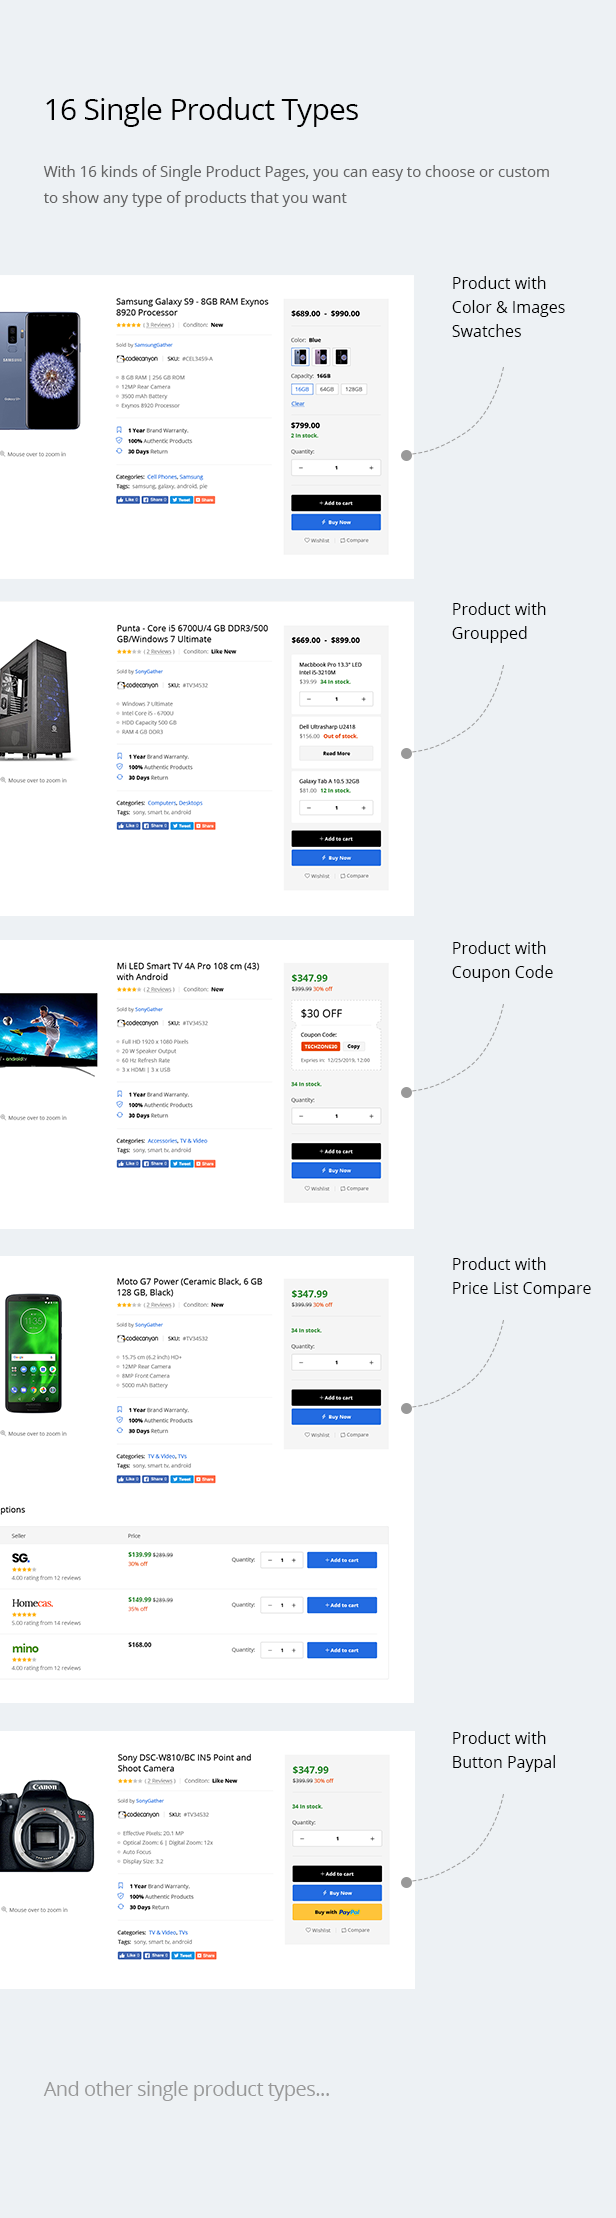 Teckoo - Electronic & Technology Marketplace eCommerce PSD Template - 10